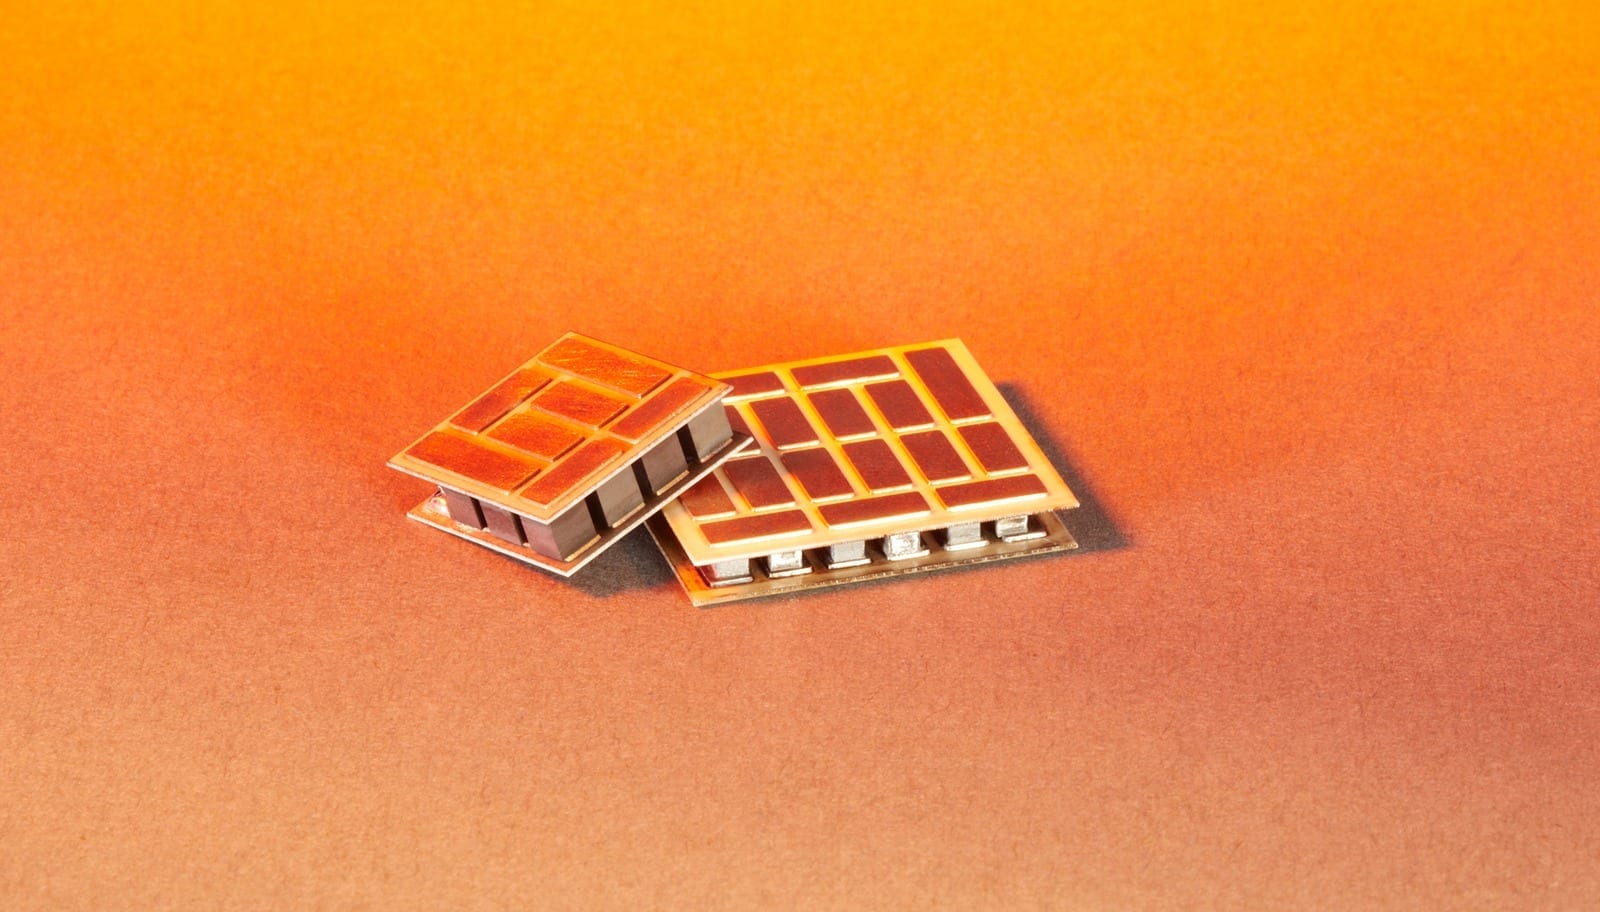 Thermoelectric materials nearing production scale